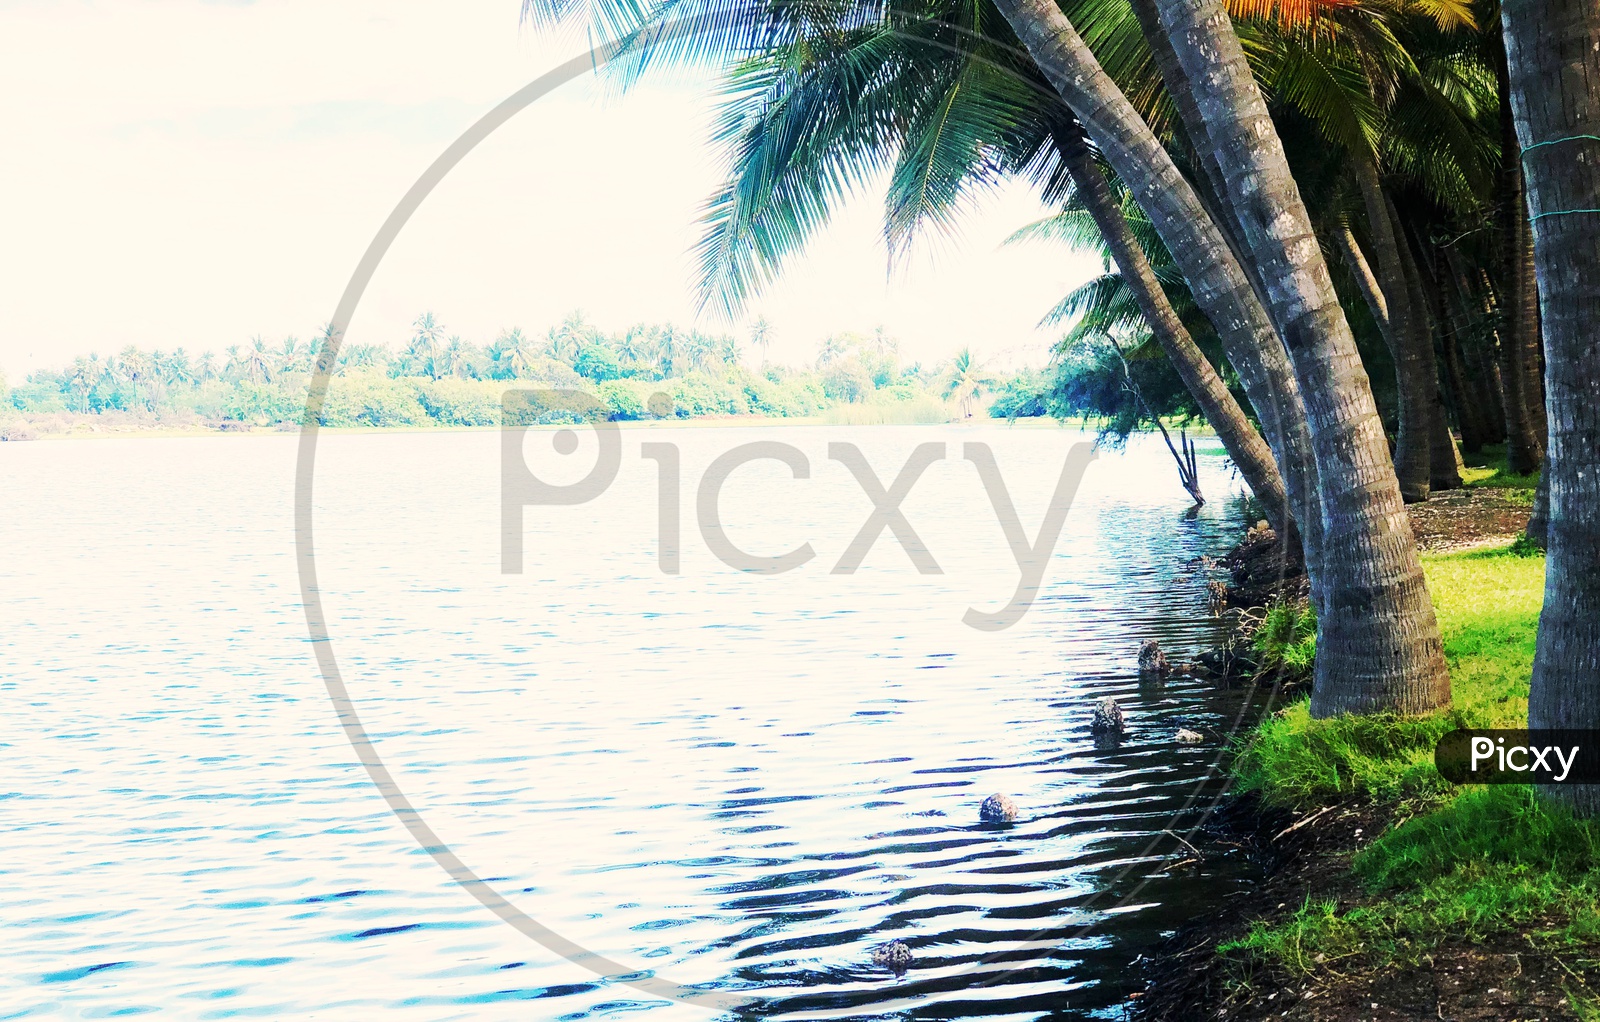 River Channel With Coconut Trees on Bank